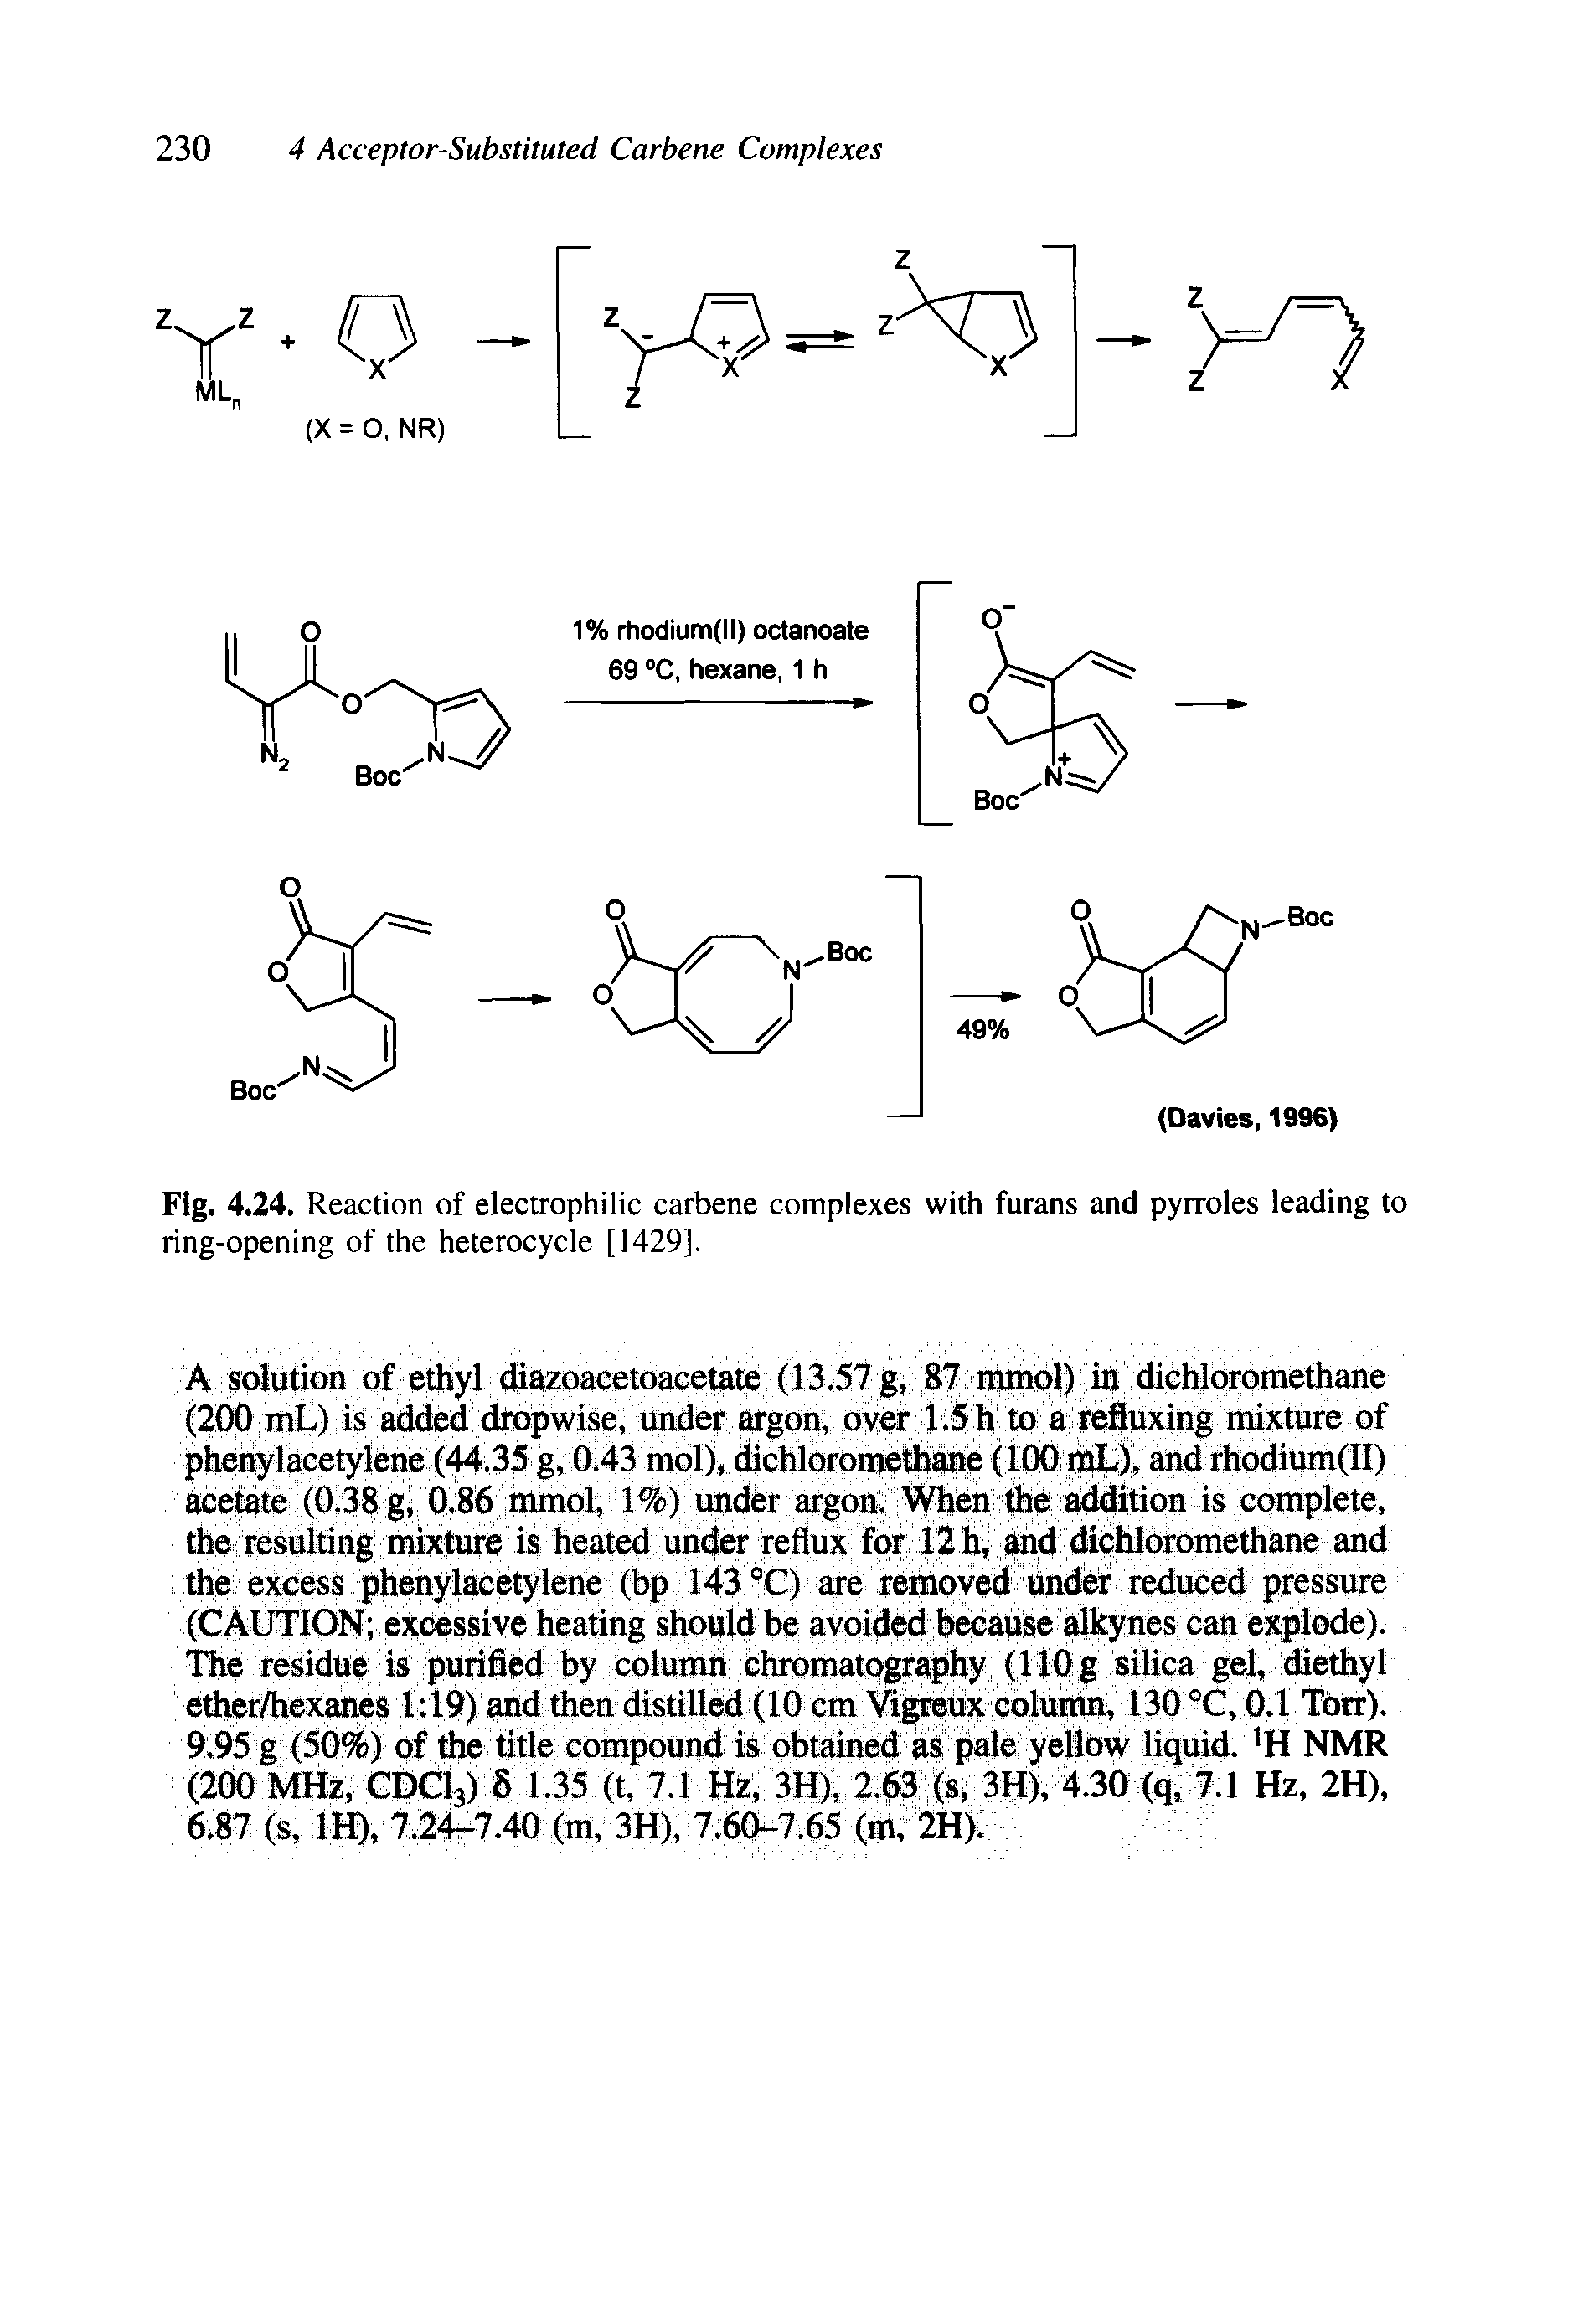 Fig. 4.24. Reaction of electrophilic carbene complexes with furans and pyrroles leading to ring-opening of the heterocycle [1429].